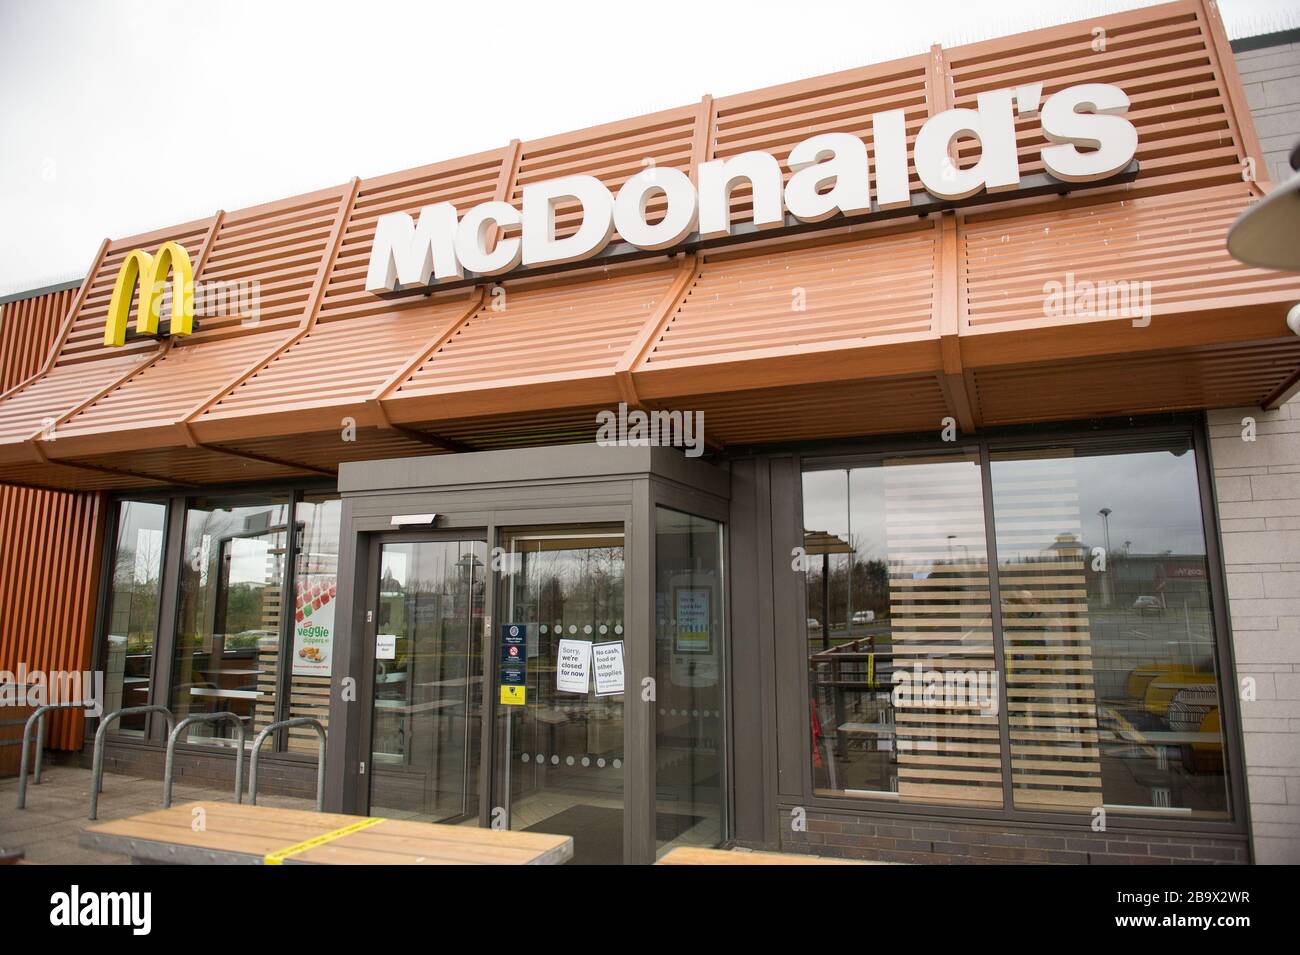 Glasgow, UK. 25th Mar, 2020. Pictured: McDonald's Restaurant in Bishopbriggs area of Glasgow is closed down due to the Coronavirus Pandemic. What would normally be a very busy drive thru and busy thoroughfare is more akin to a deserted building and surrounding carpark. Credit: Colin Fisher/Alamy Live News Stock Photo